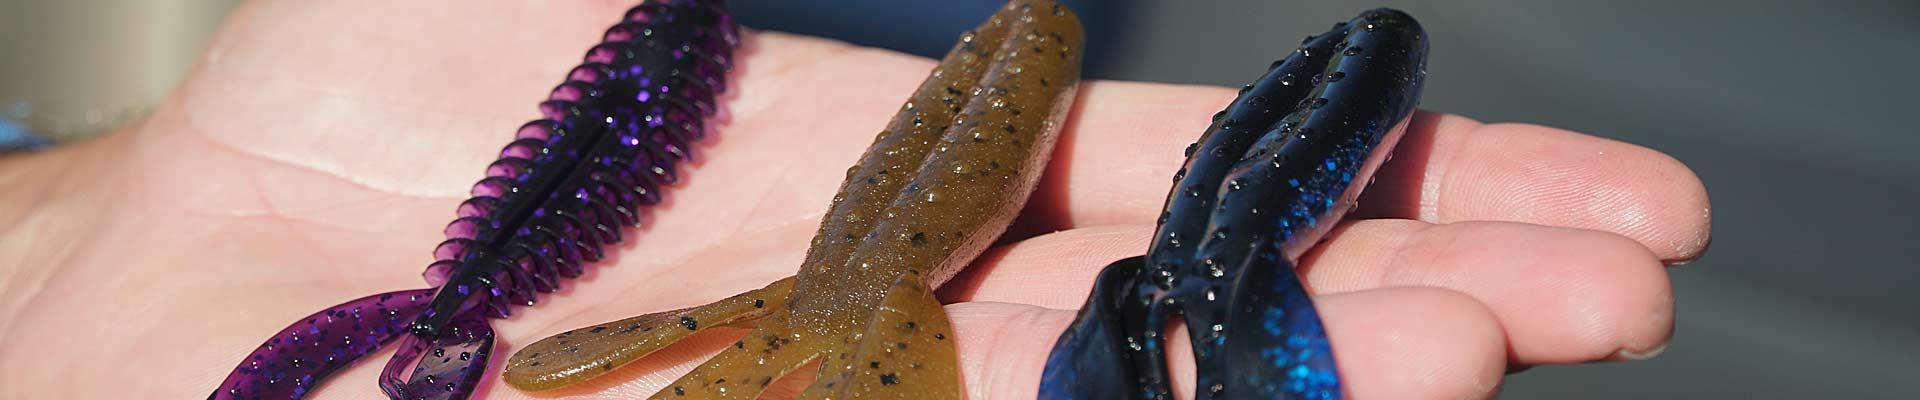 The Art of Selecting Soft Plastic Baits: Pro Tips!